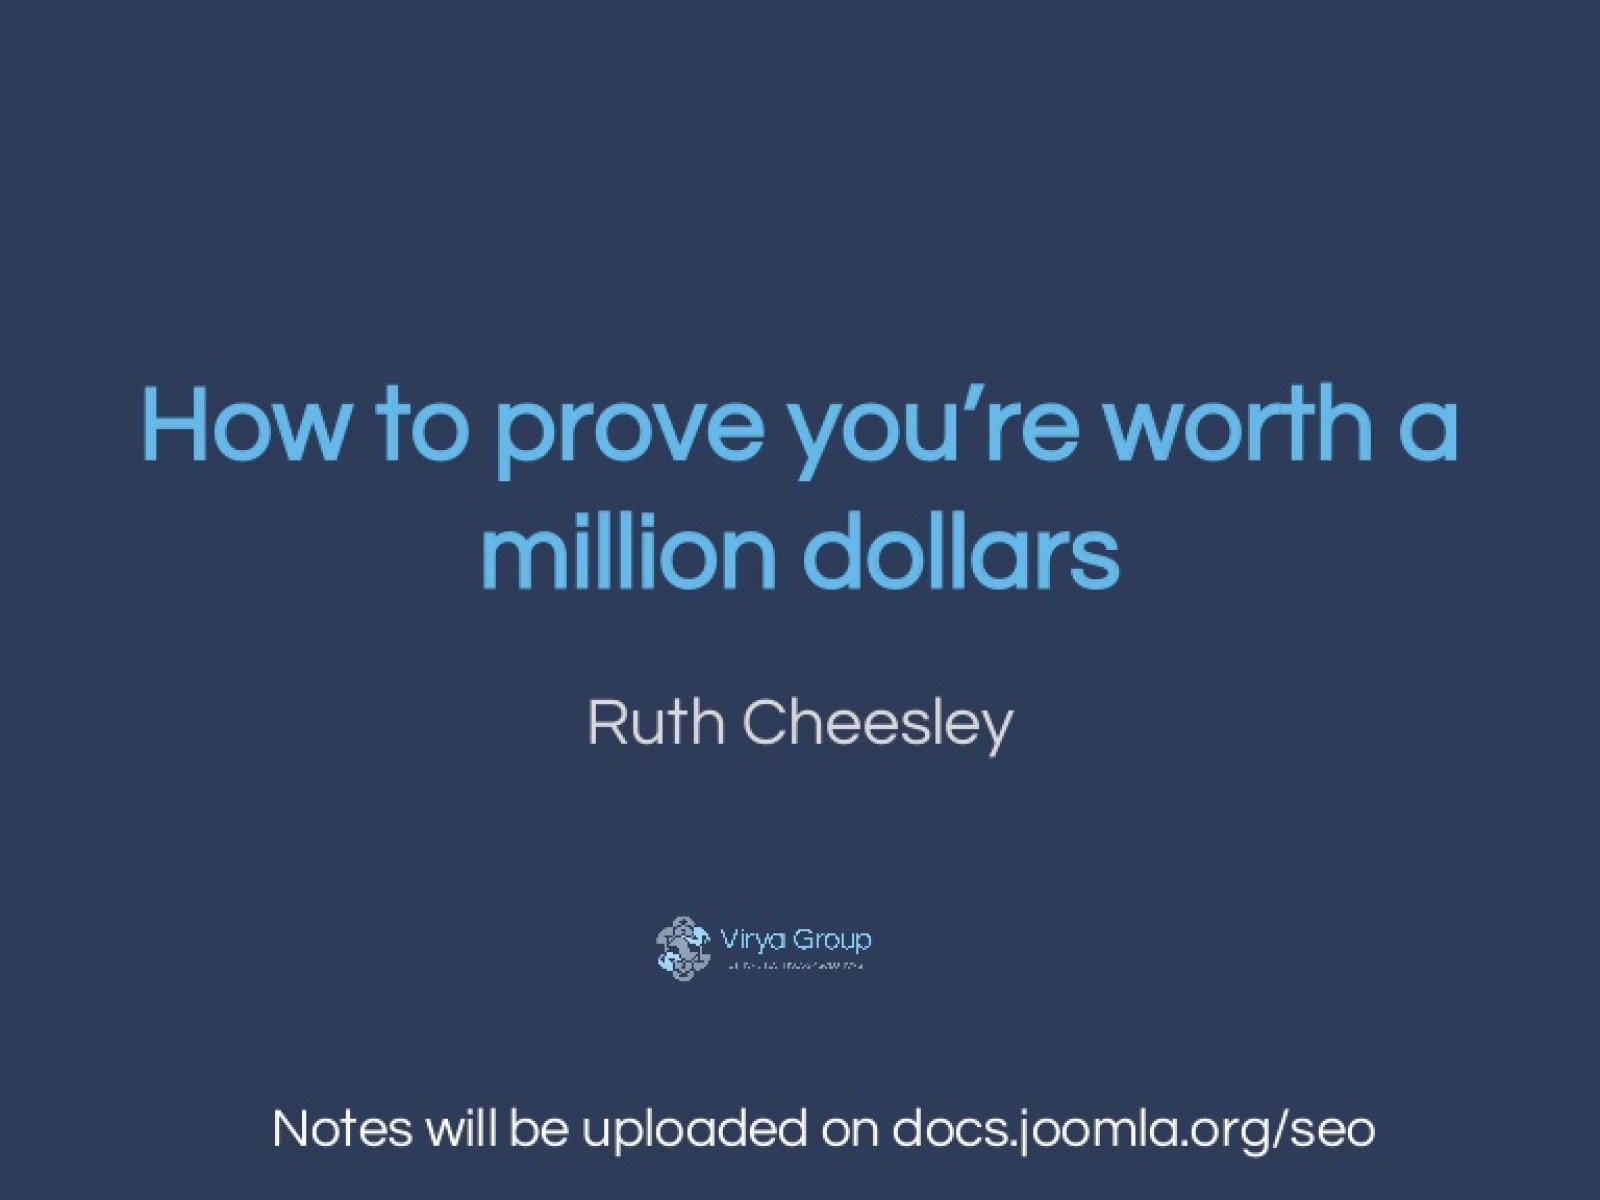 How to prove you are worth a million dollars